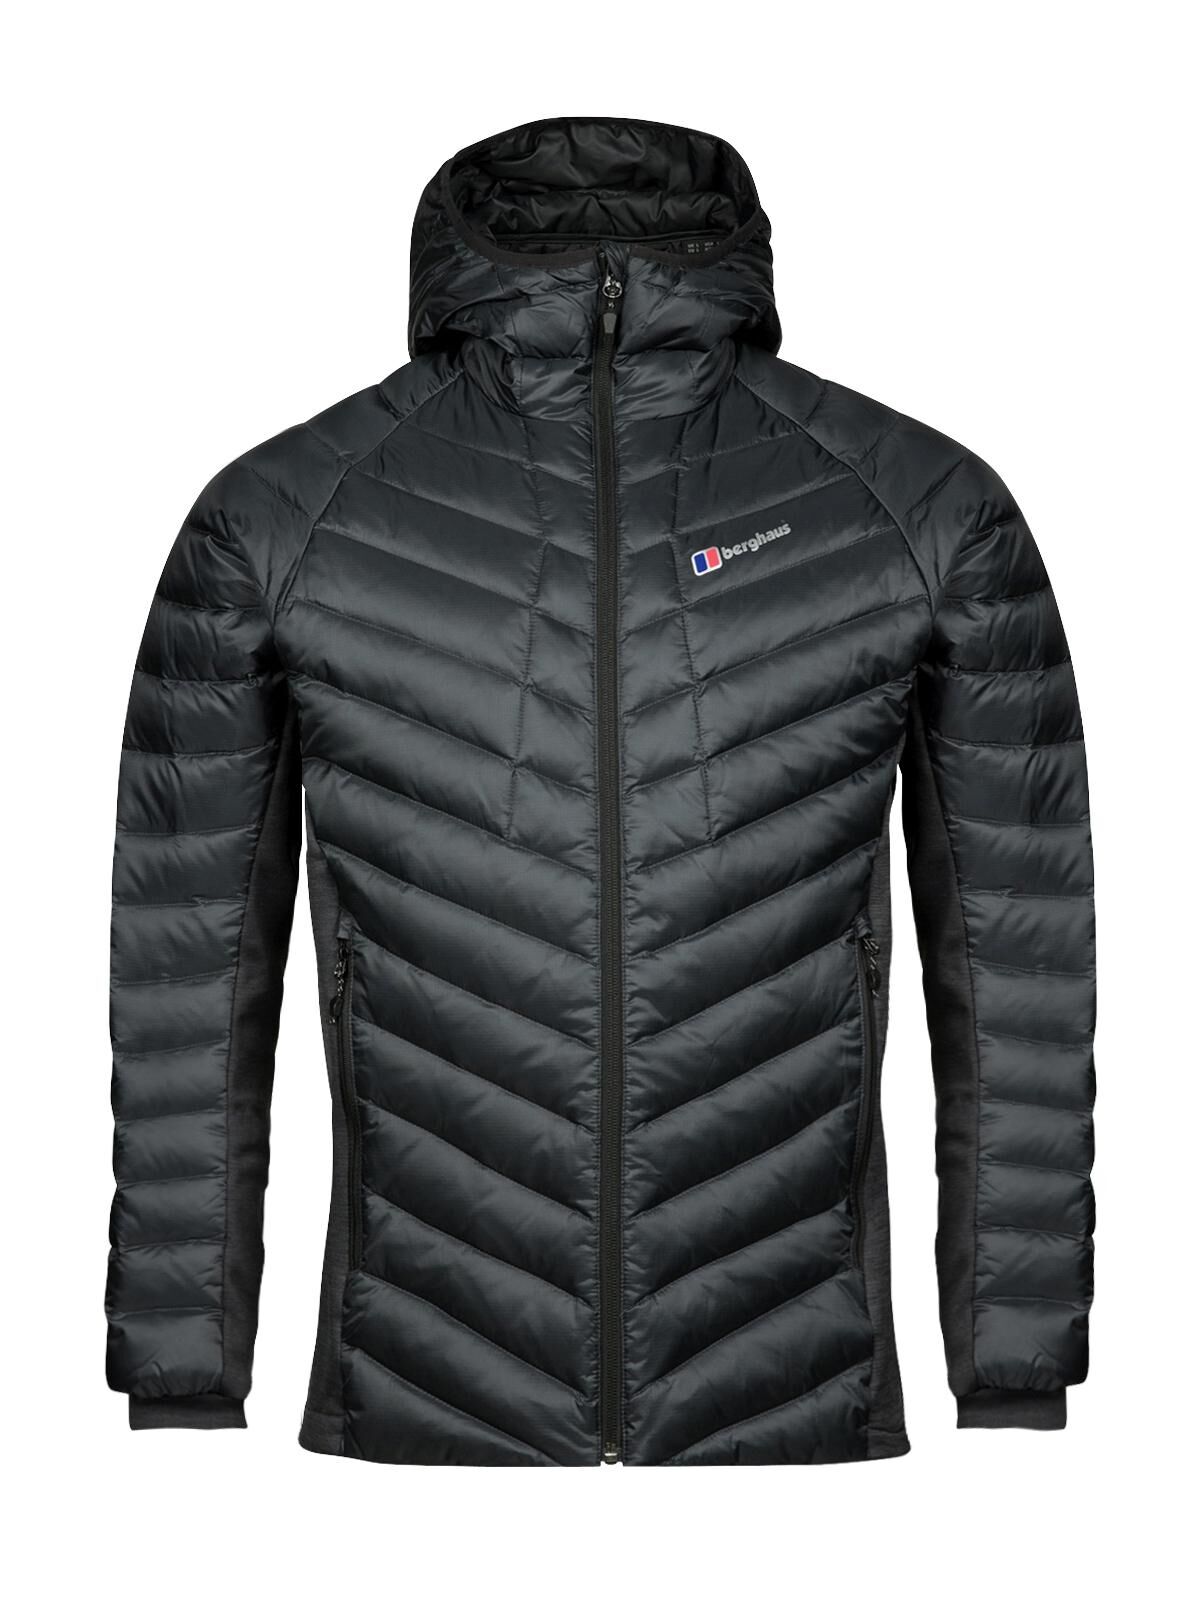 Berghaus Tephra Stretch Reflect Down Insulated Jacket - Down jacket - Women's